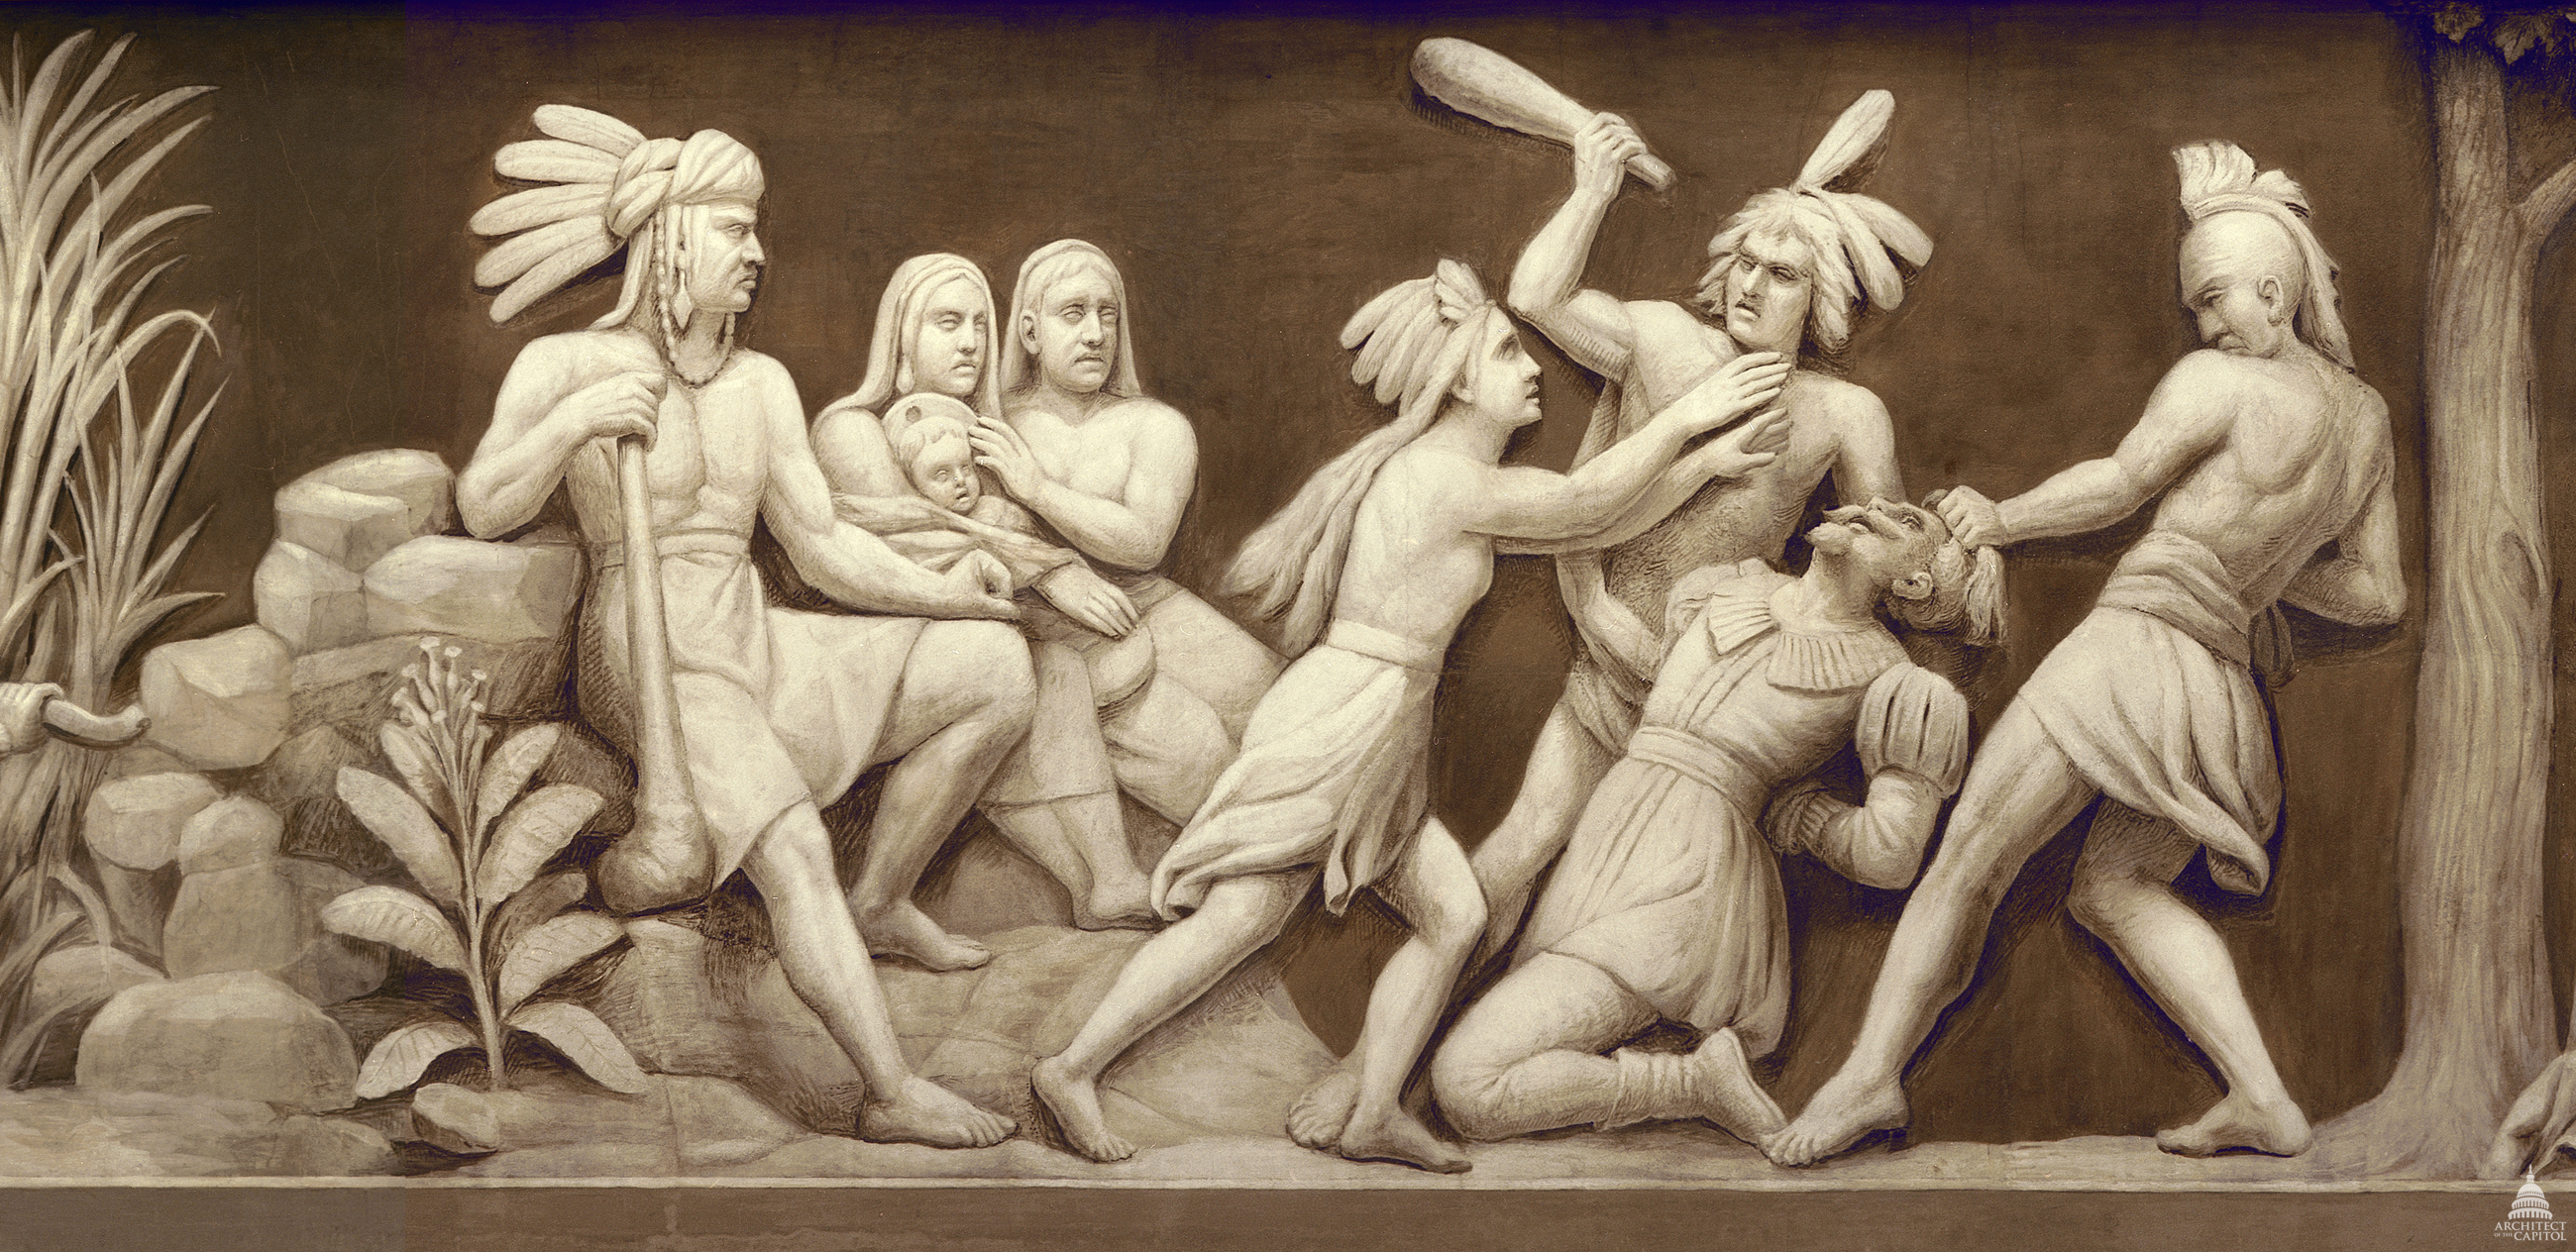 In this scene from the Frieze of American History, Pocahontas saves Captain John Smith, one of the founders of Jamestown, Virginia, from being clubbed to death